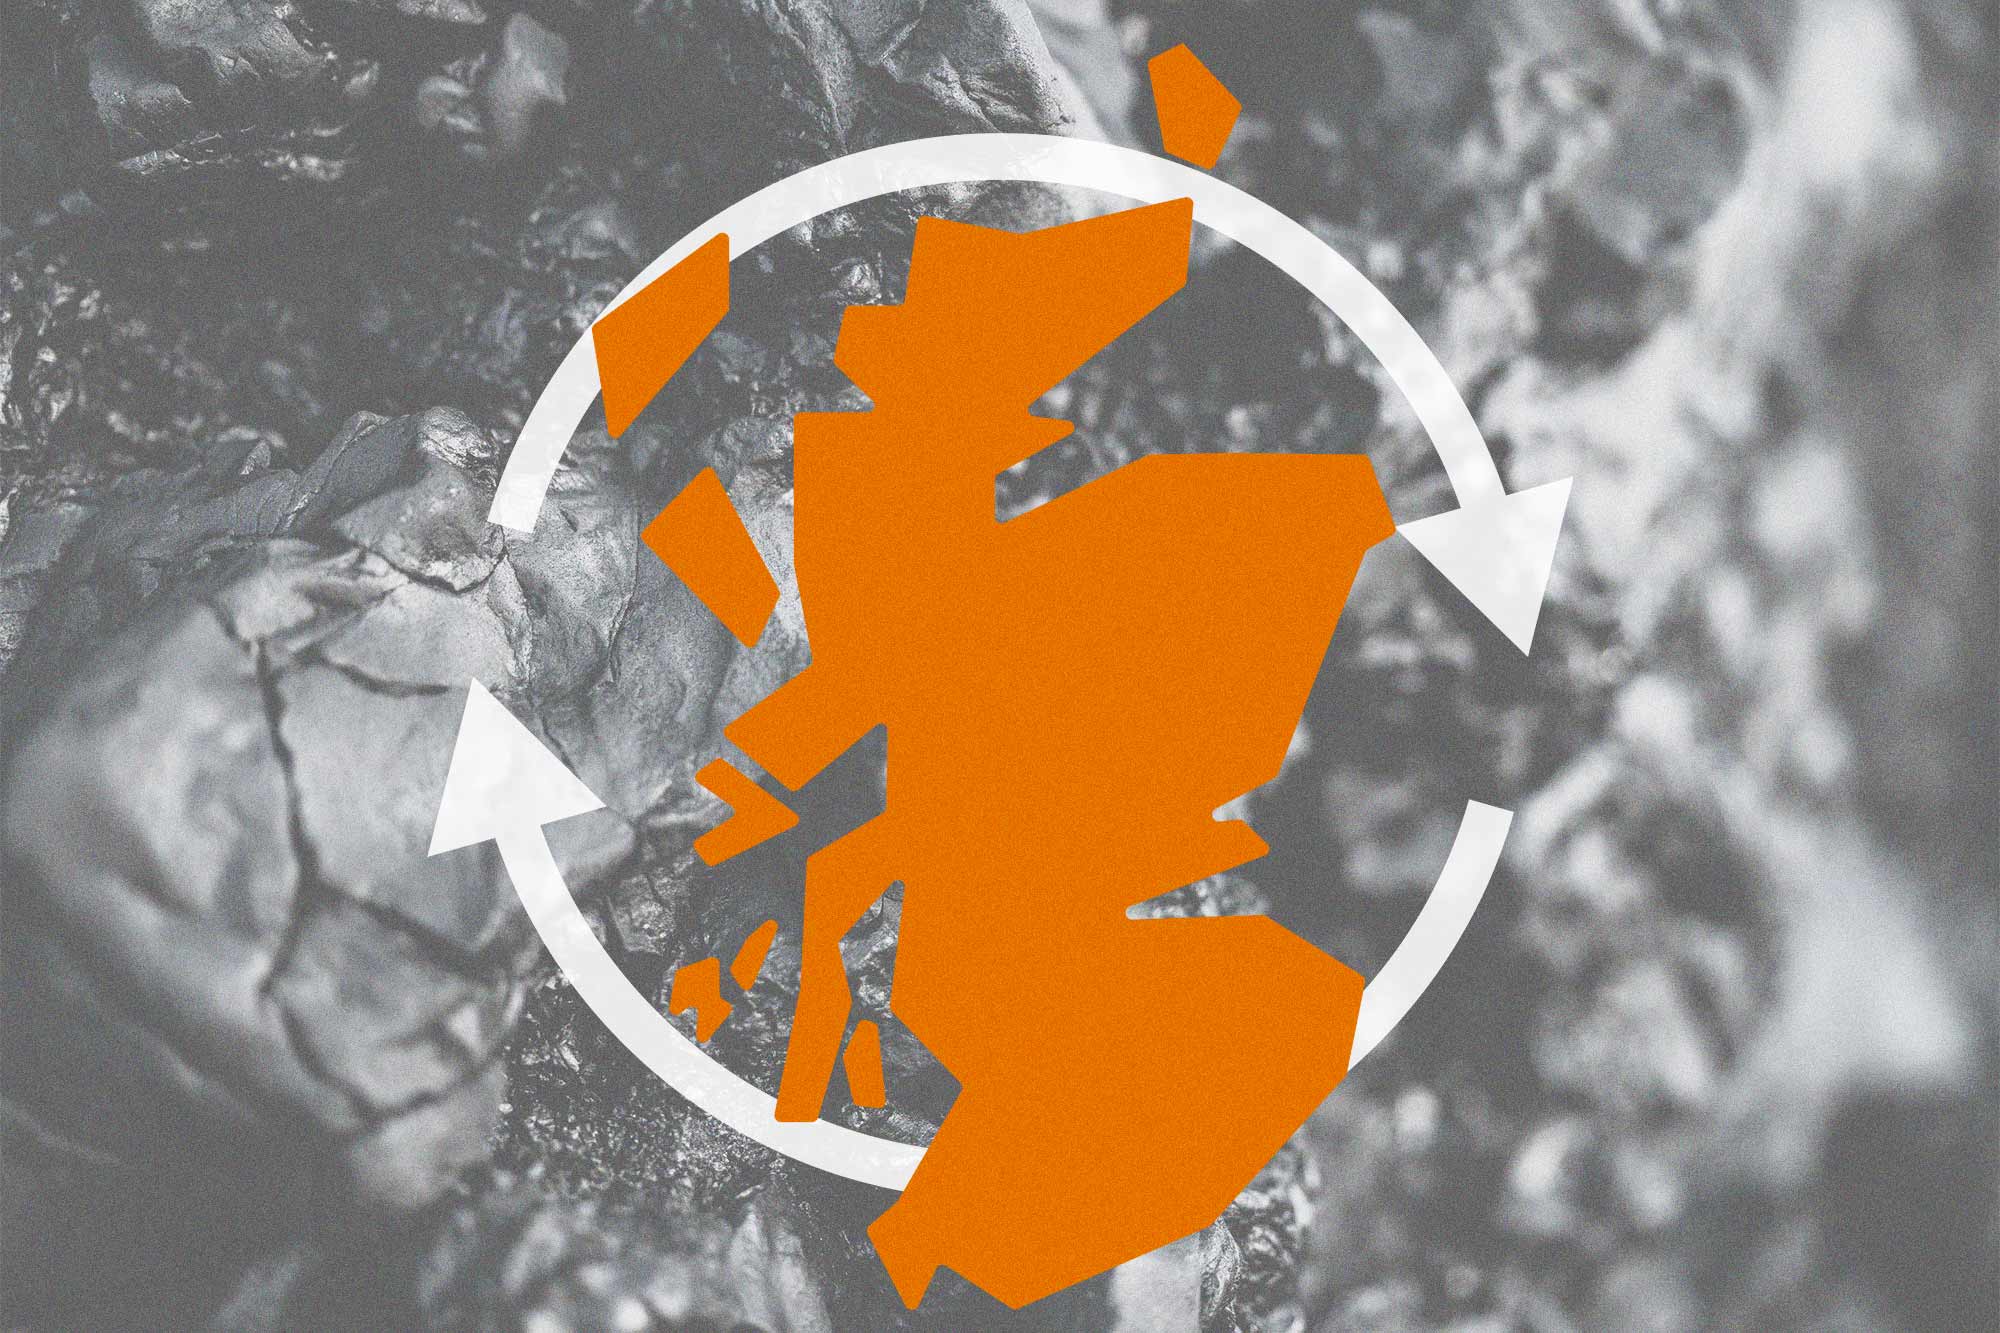 The outline of Scotland superimposed on a circle of arrows pointing clockwise